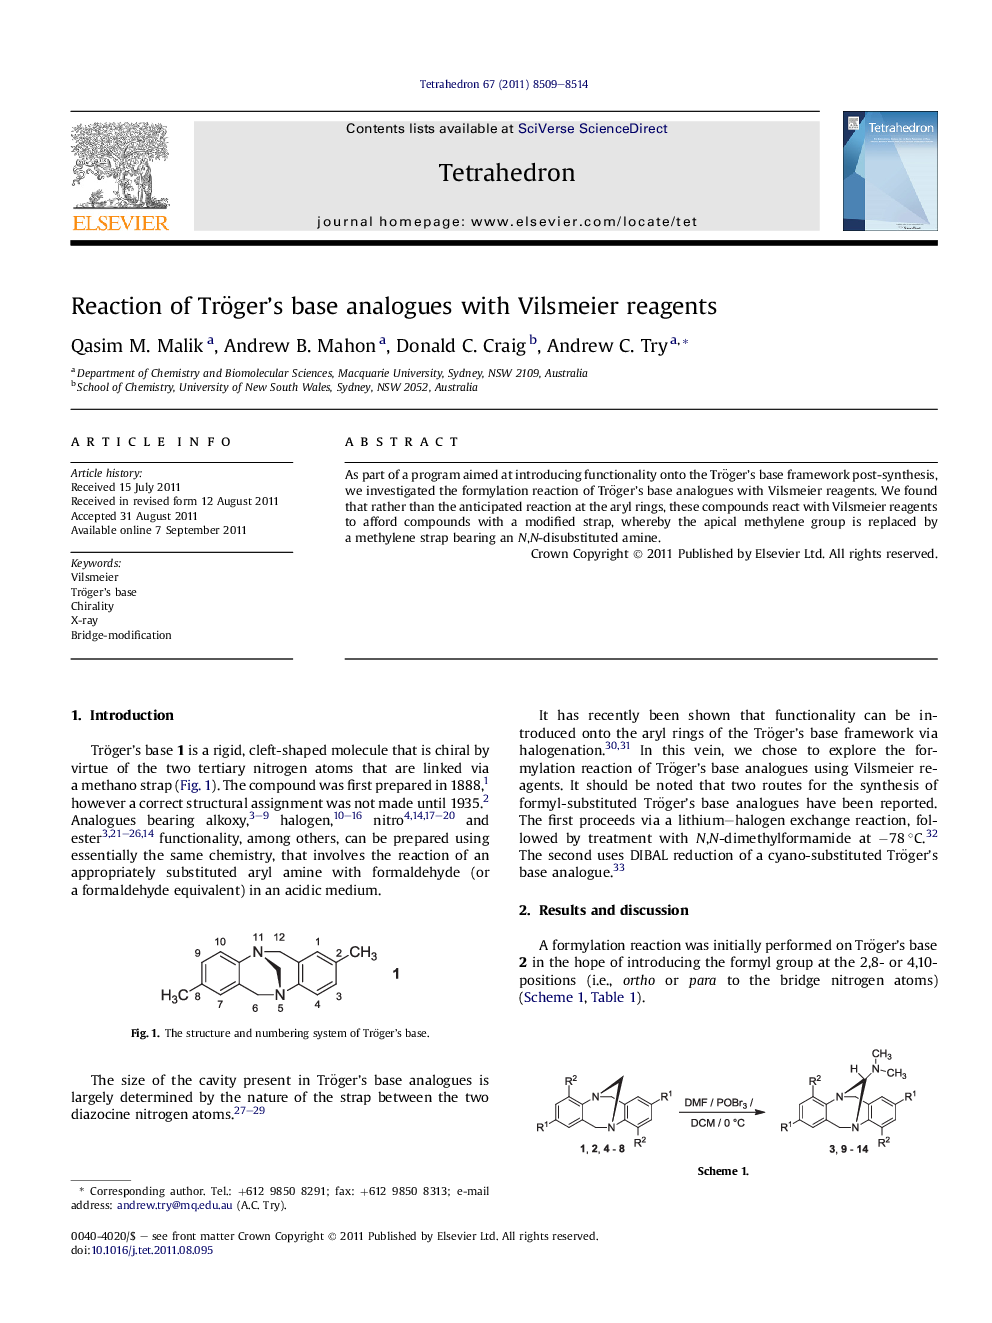 Reaction of Tröger’s base analogues with Vilsmeier reagents